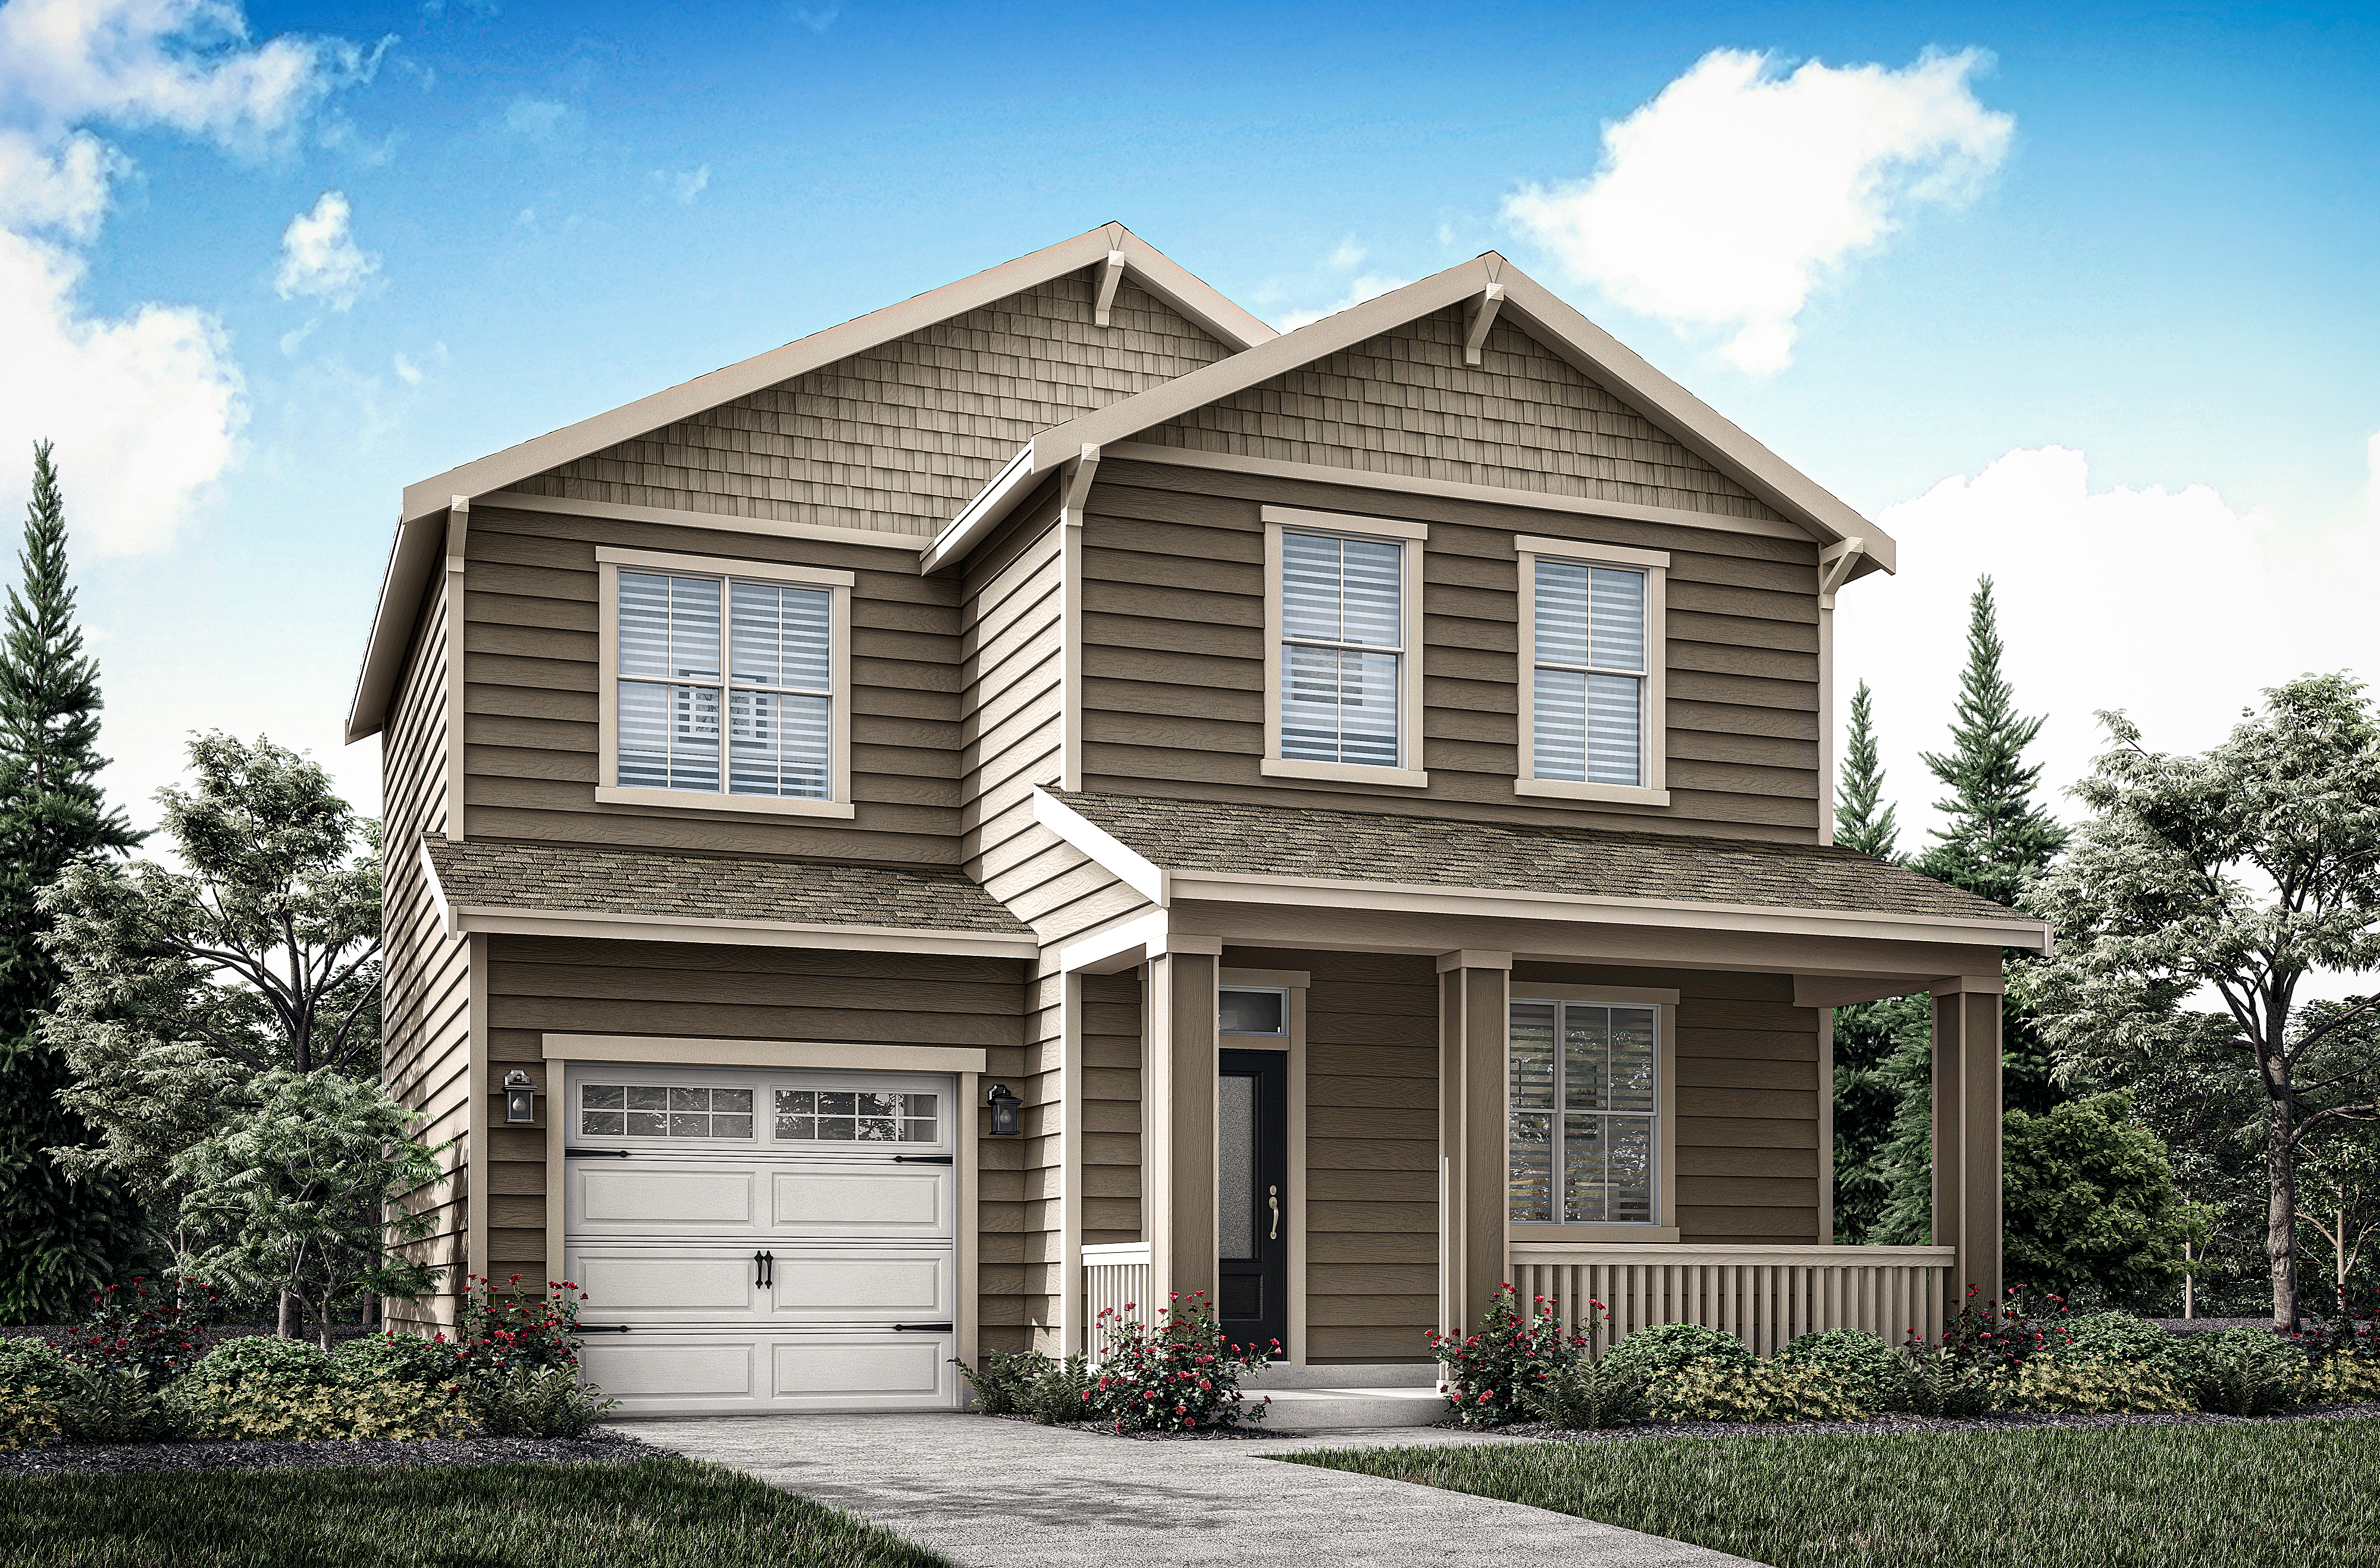 The three bedrooms, two-and-a-half-bath Cottonwood plan features a spacious family room.